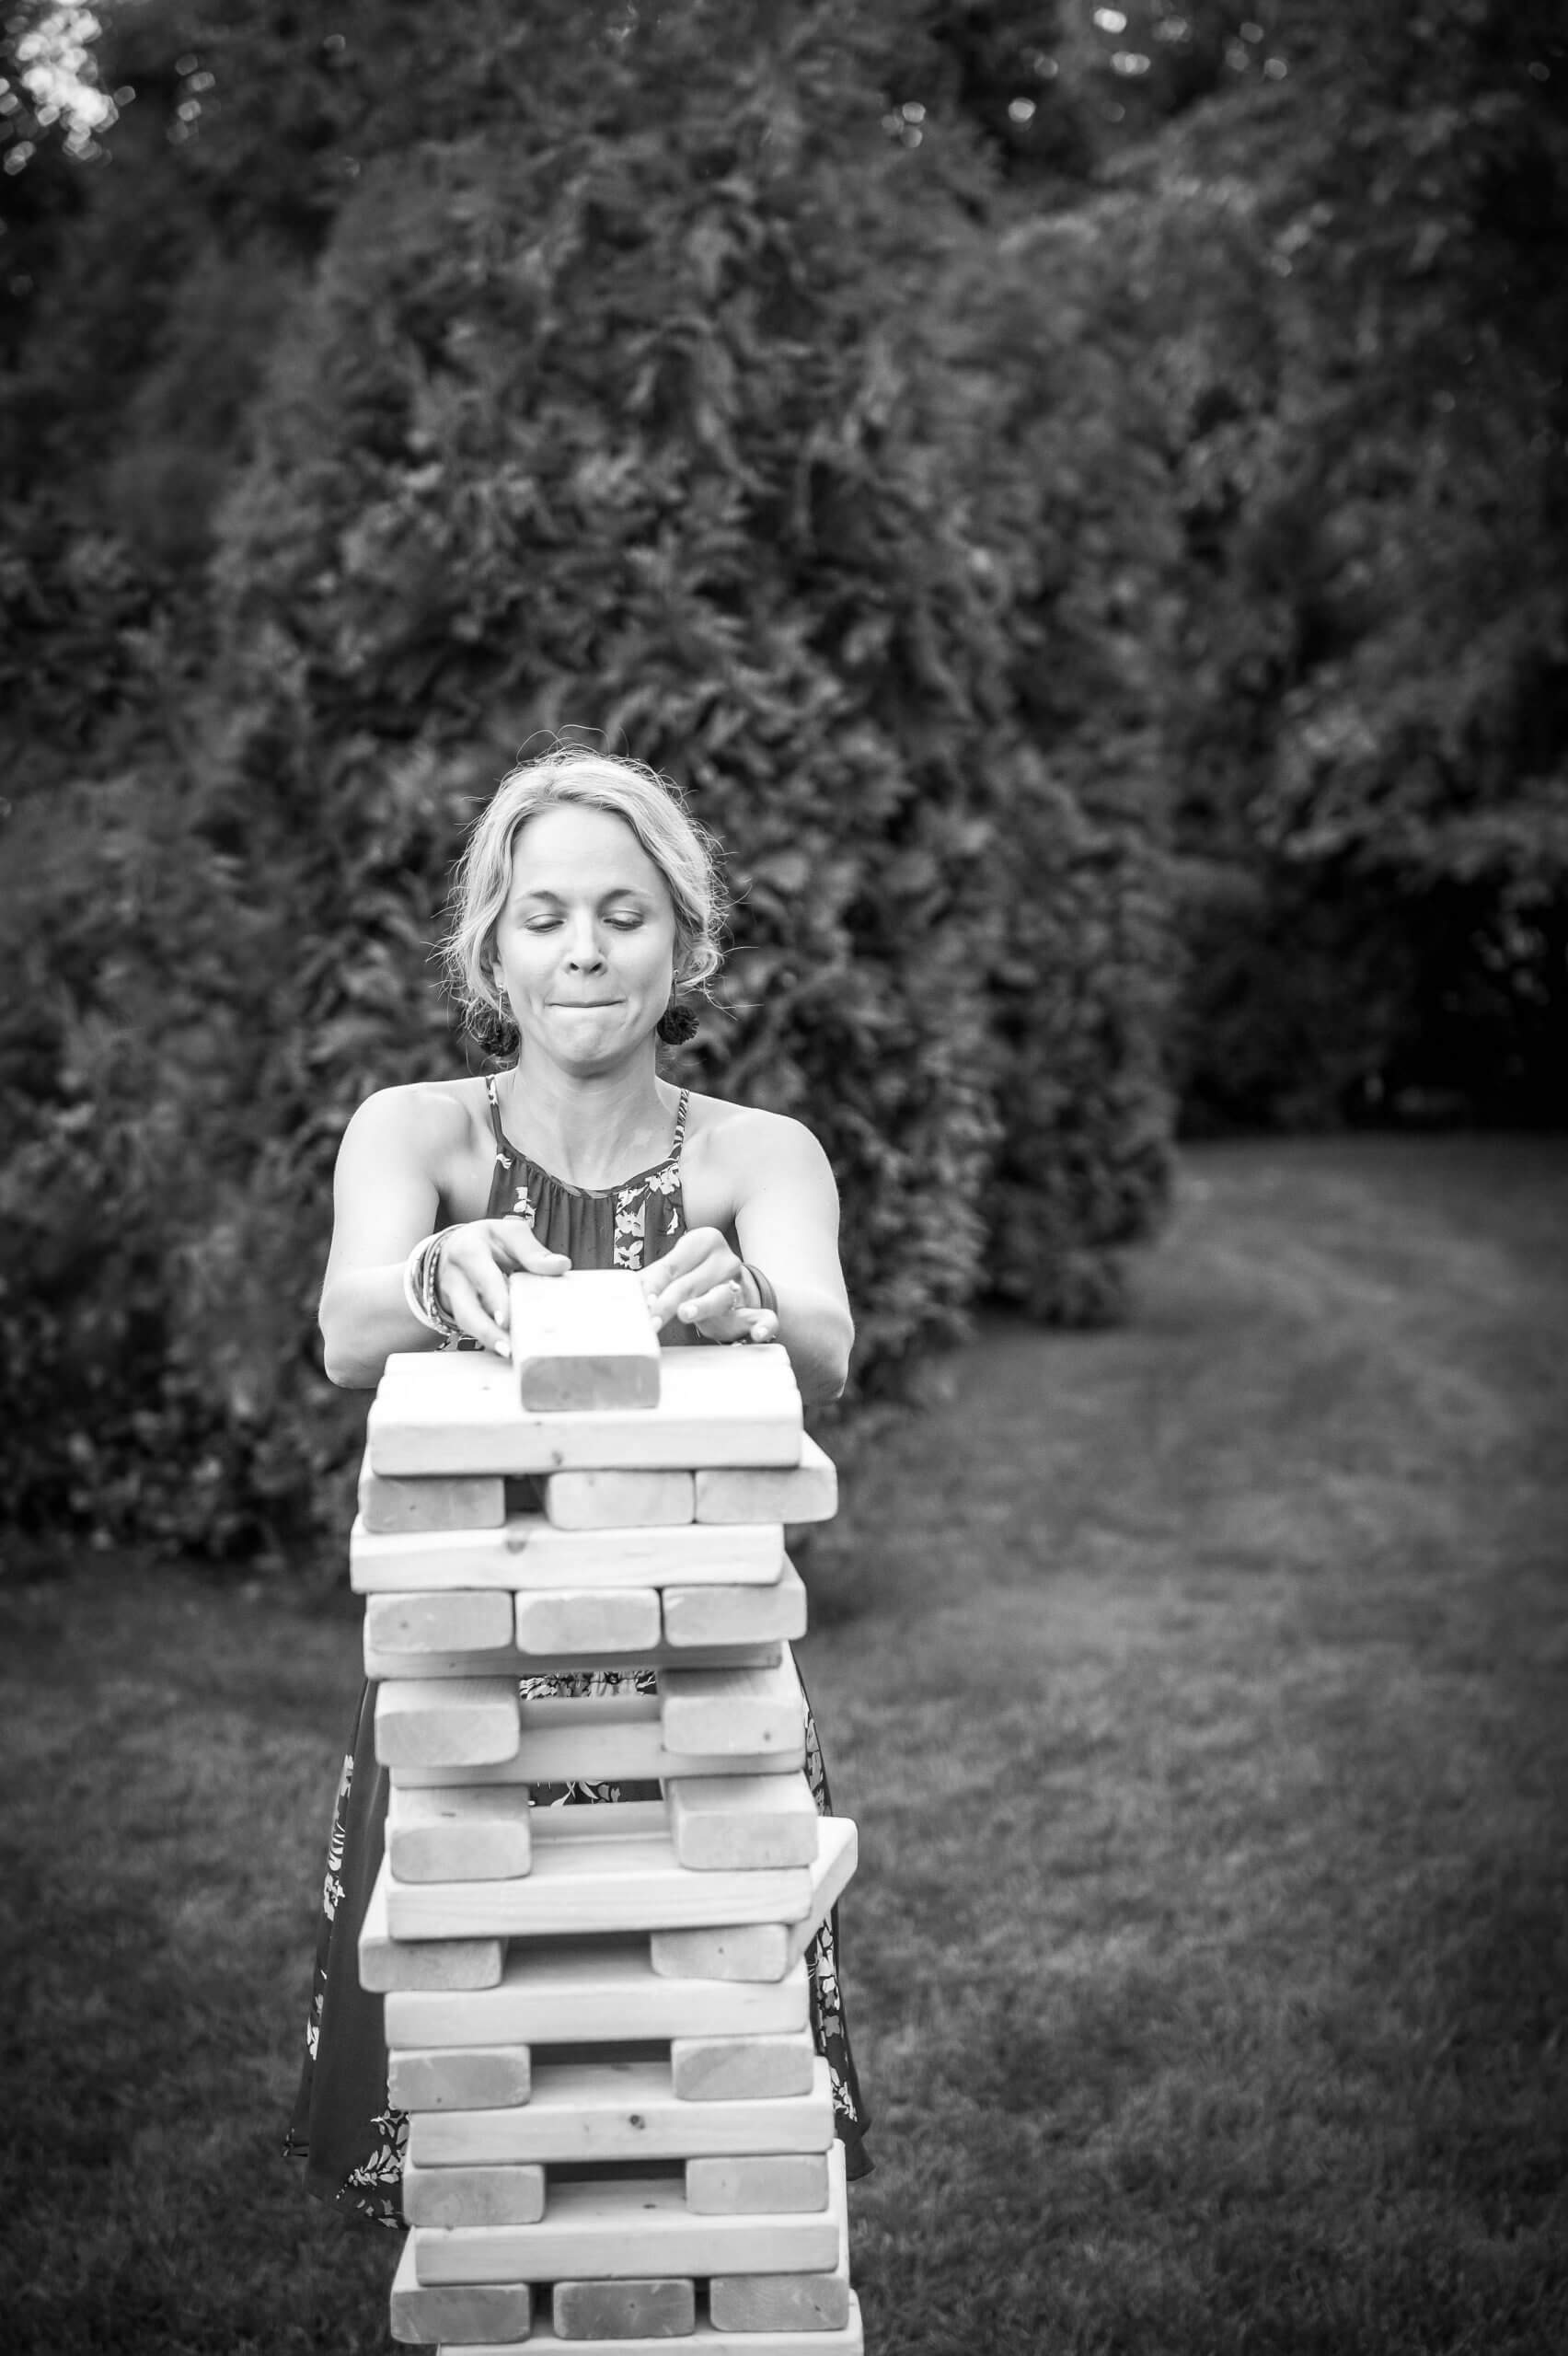 A woman plays lawn Jenga, carefully placing a piece on the top of the tower.